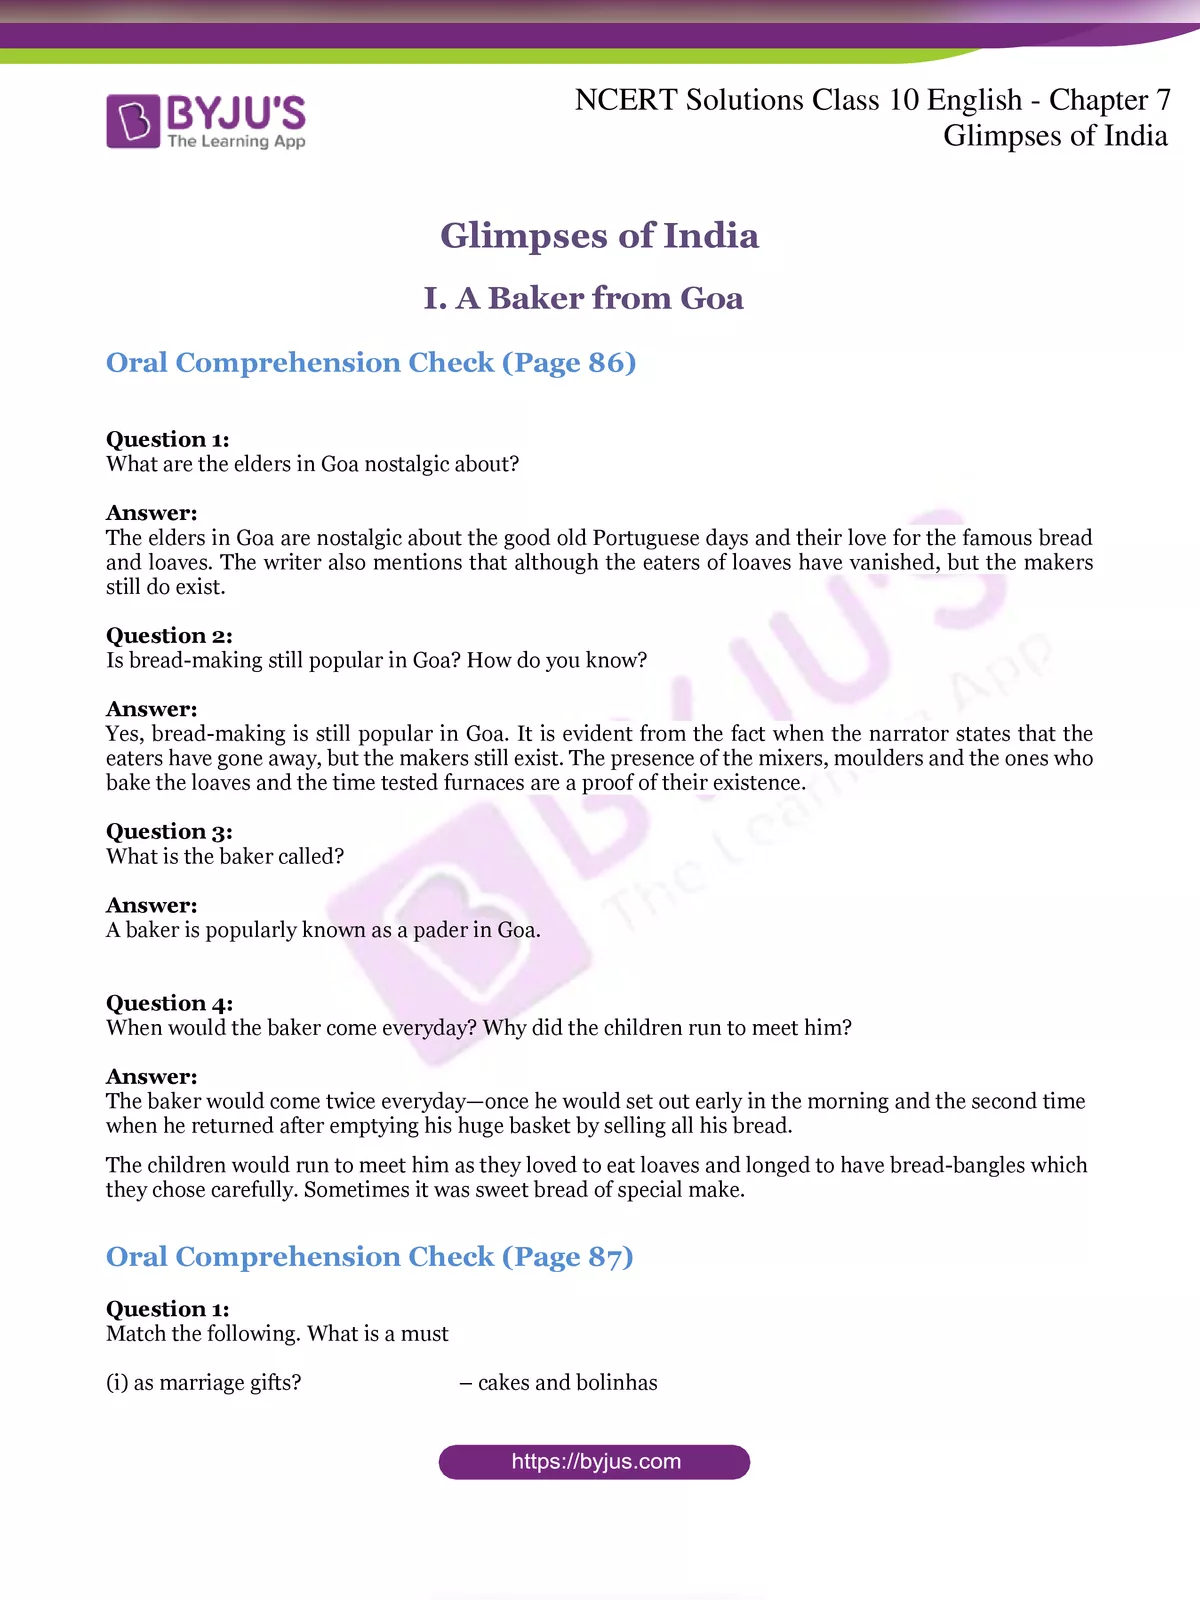 Glimpses of India Question and Answer